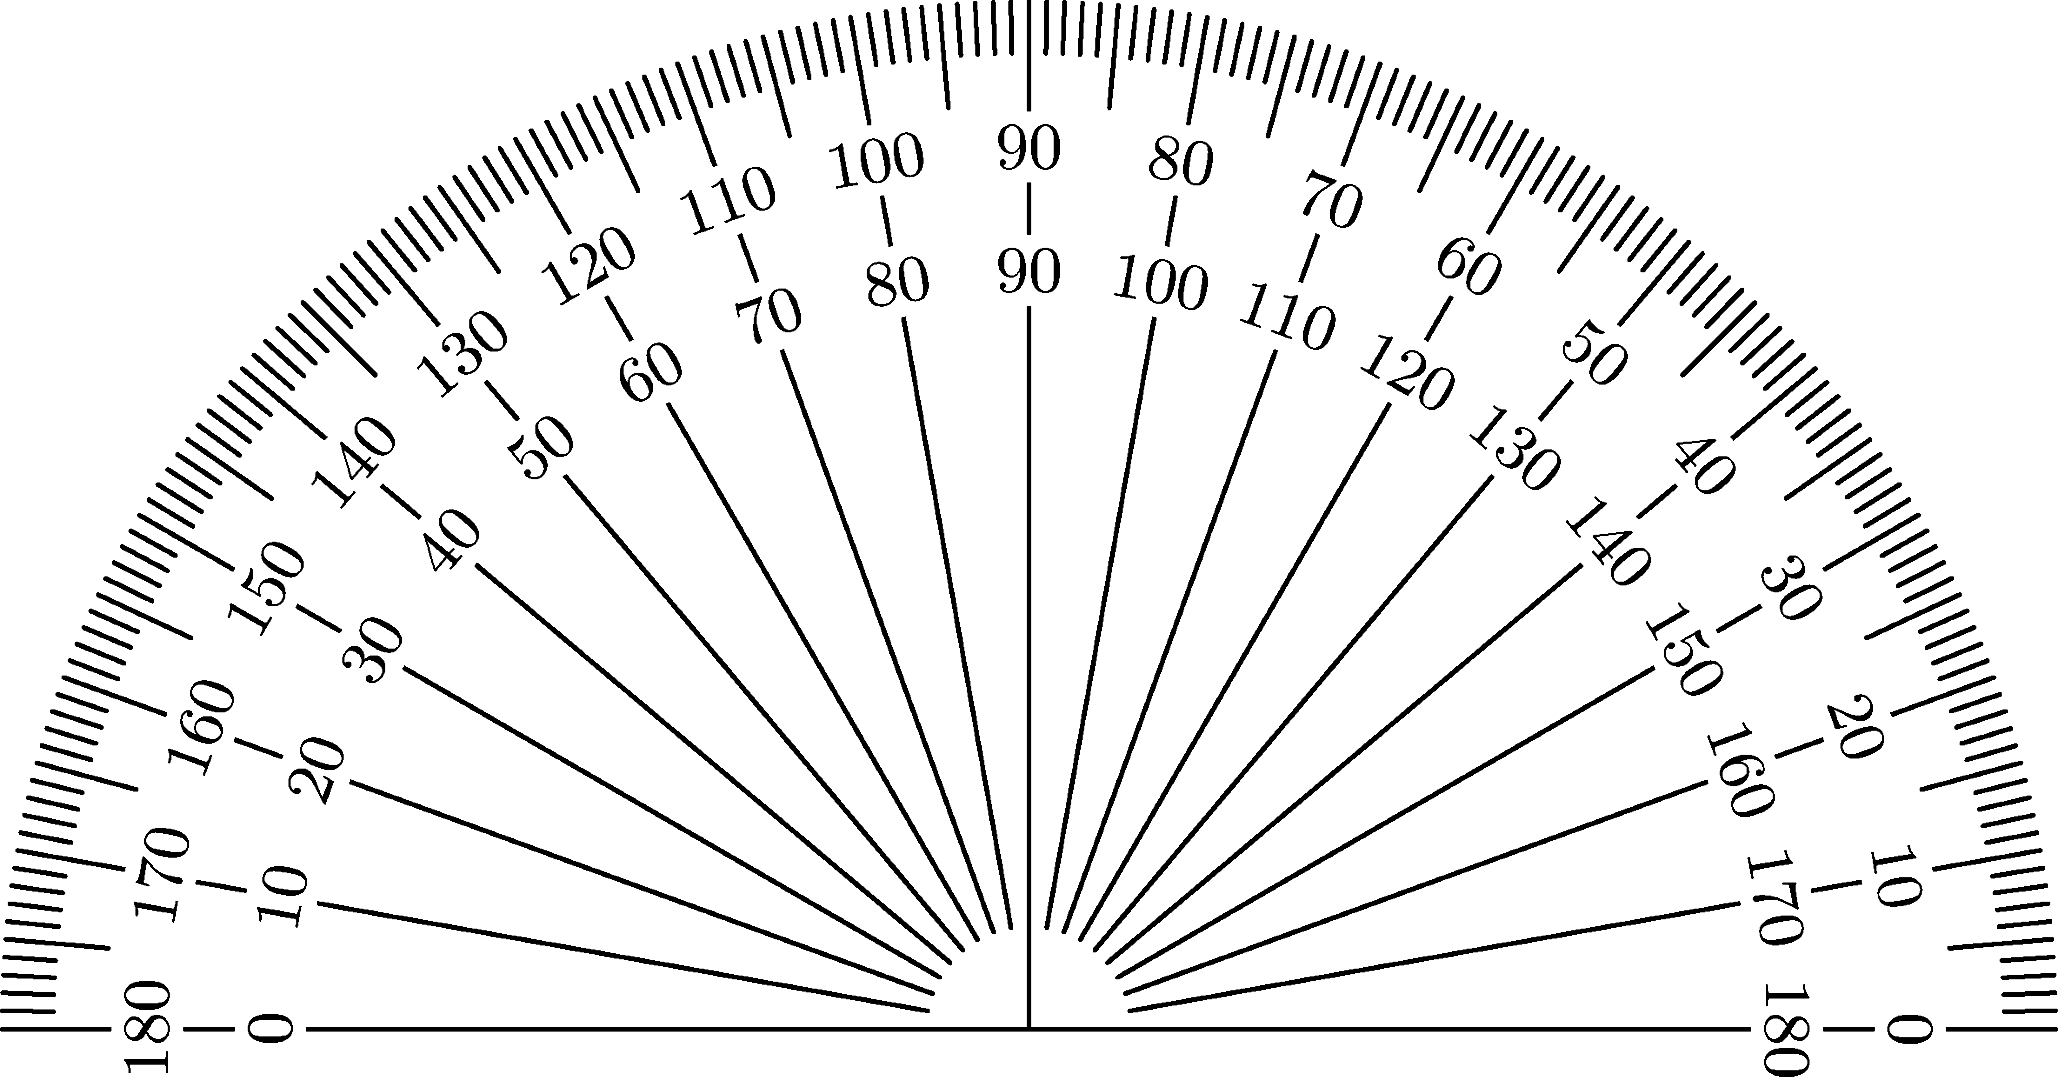 military protractor nsn